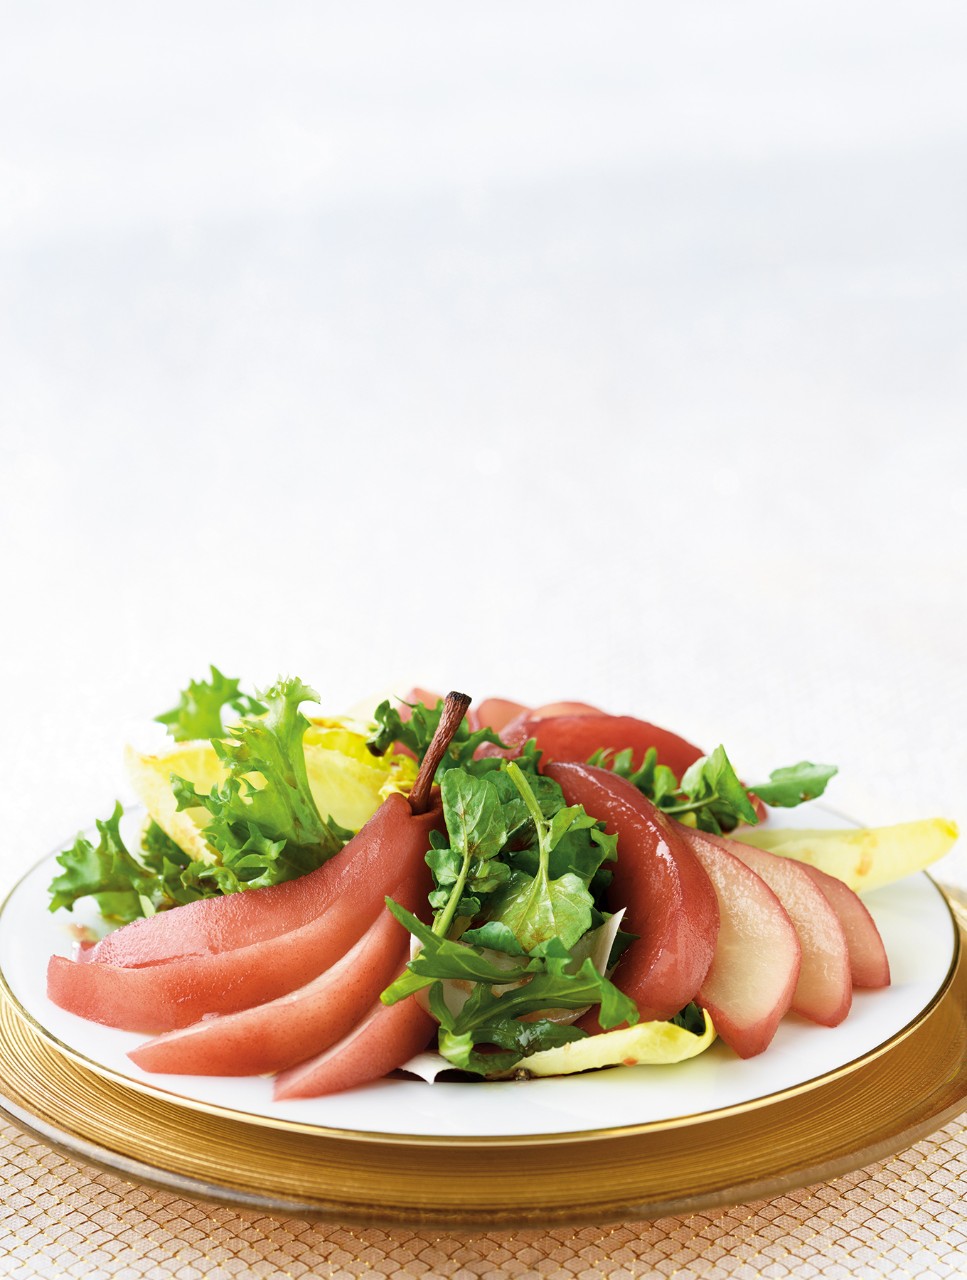 Salad with Confit of Pears